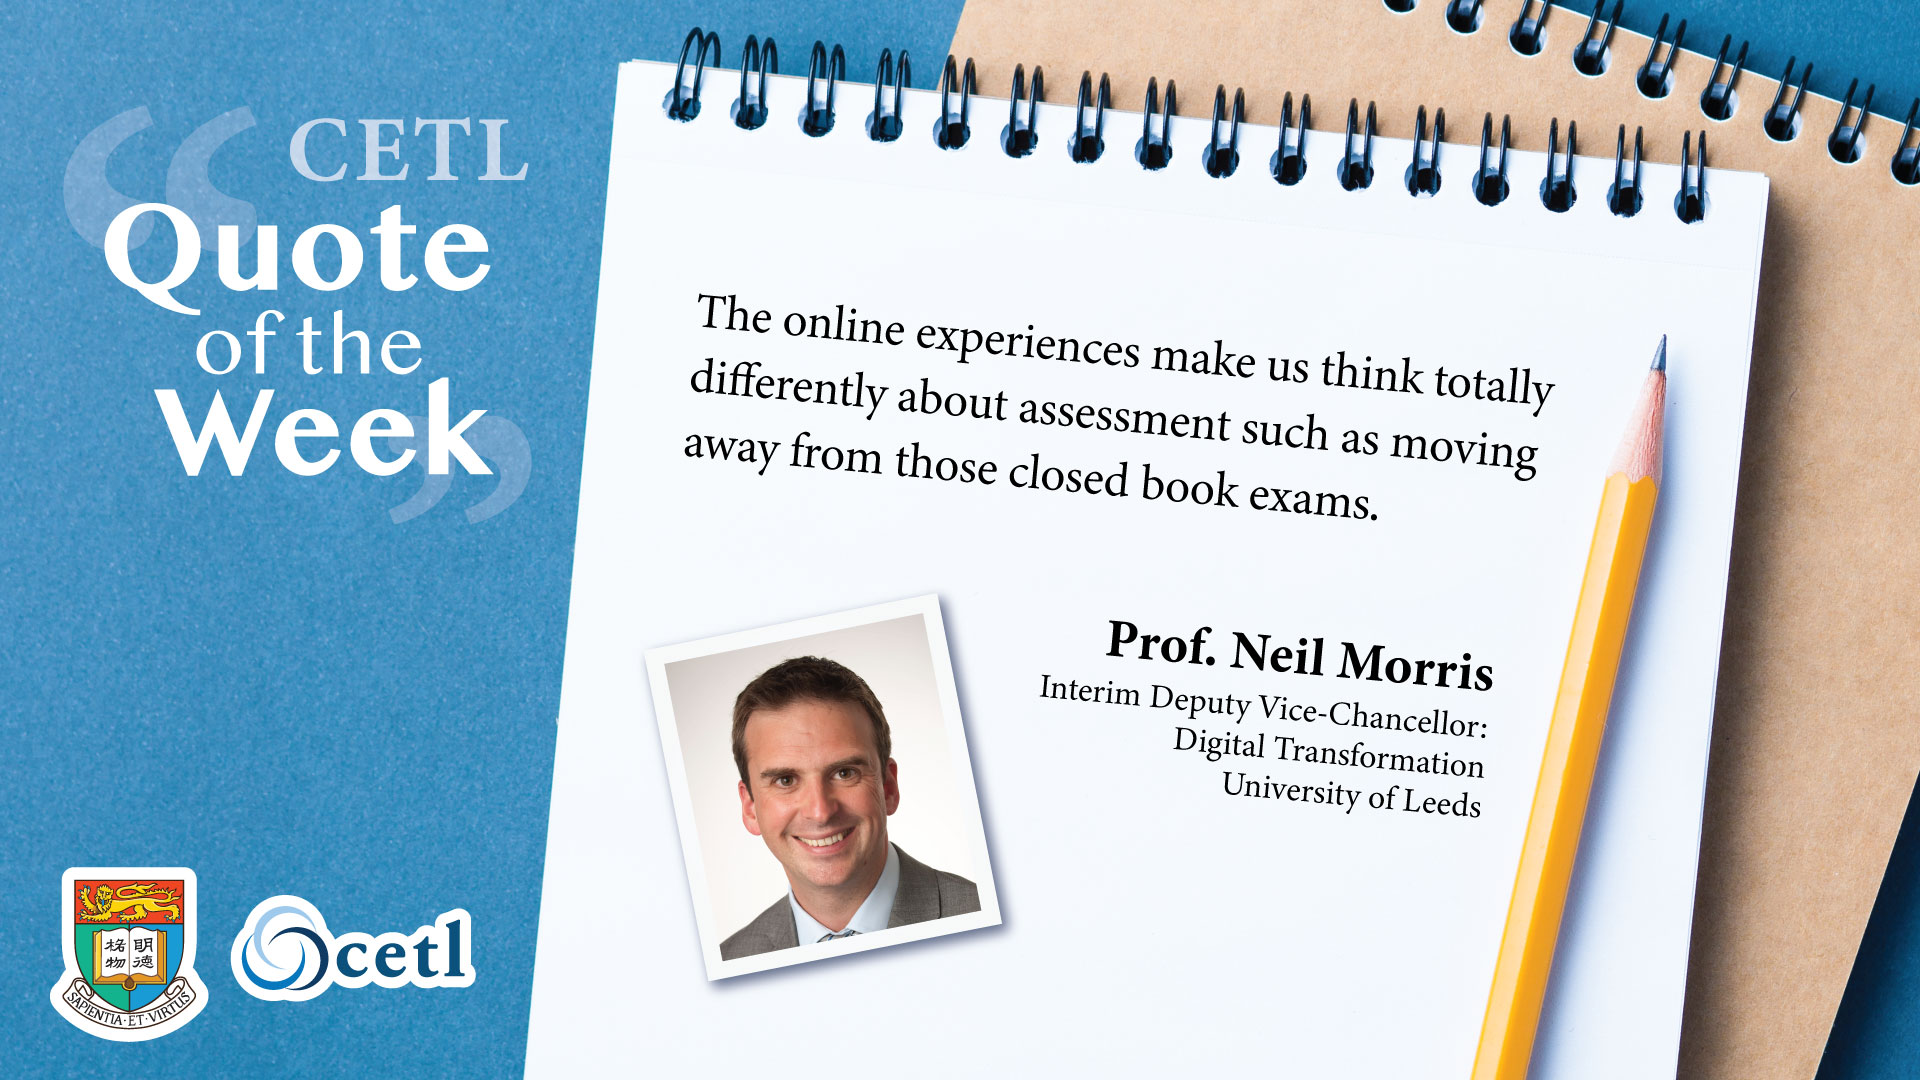 Prof. Neil Morris - The online experiences make us think totally differently about assessment such as moving away from those closed book exams.